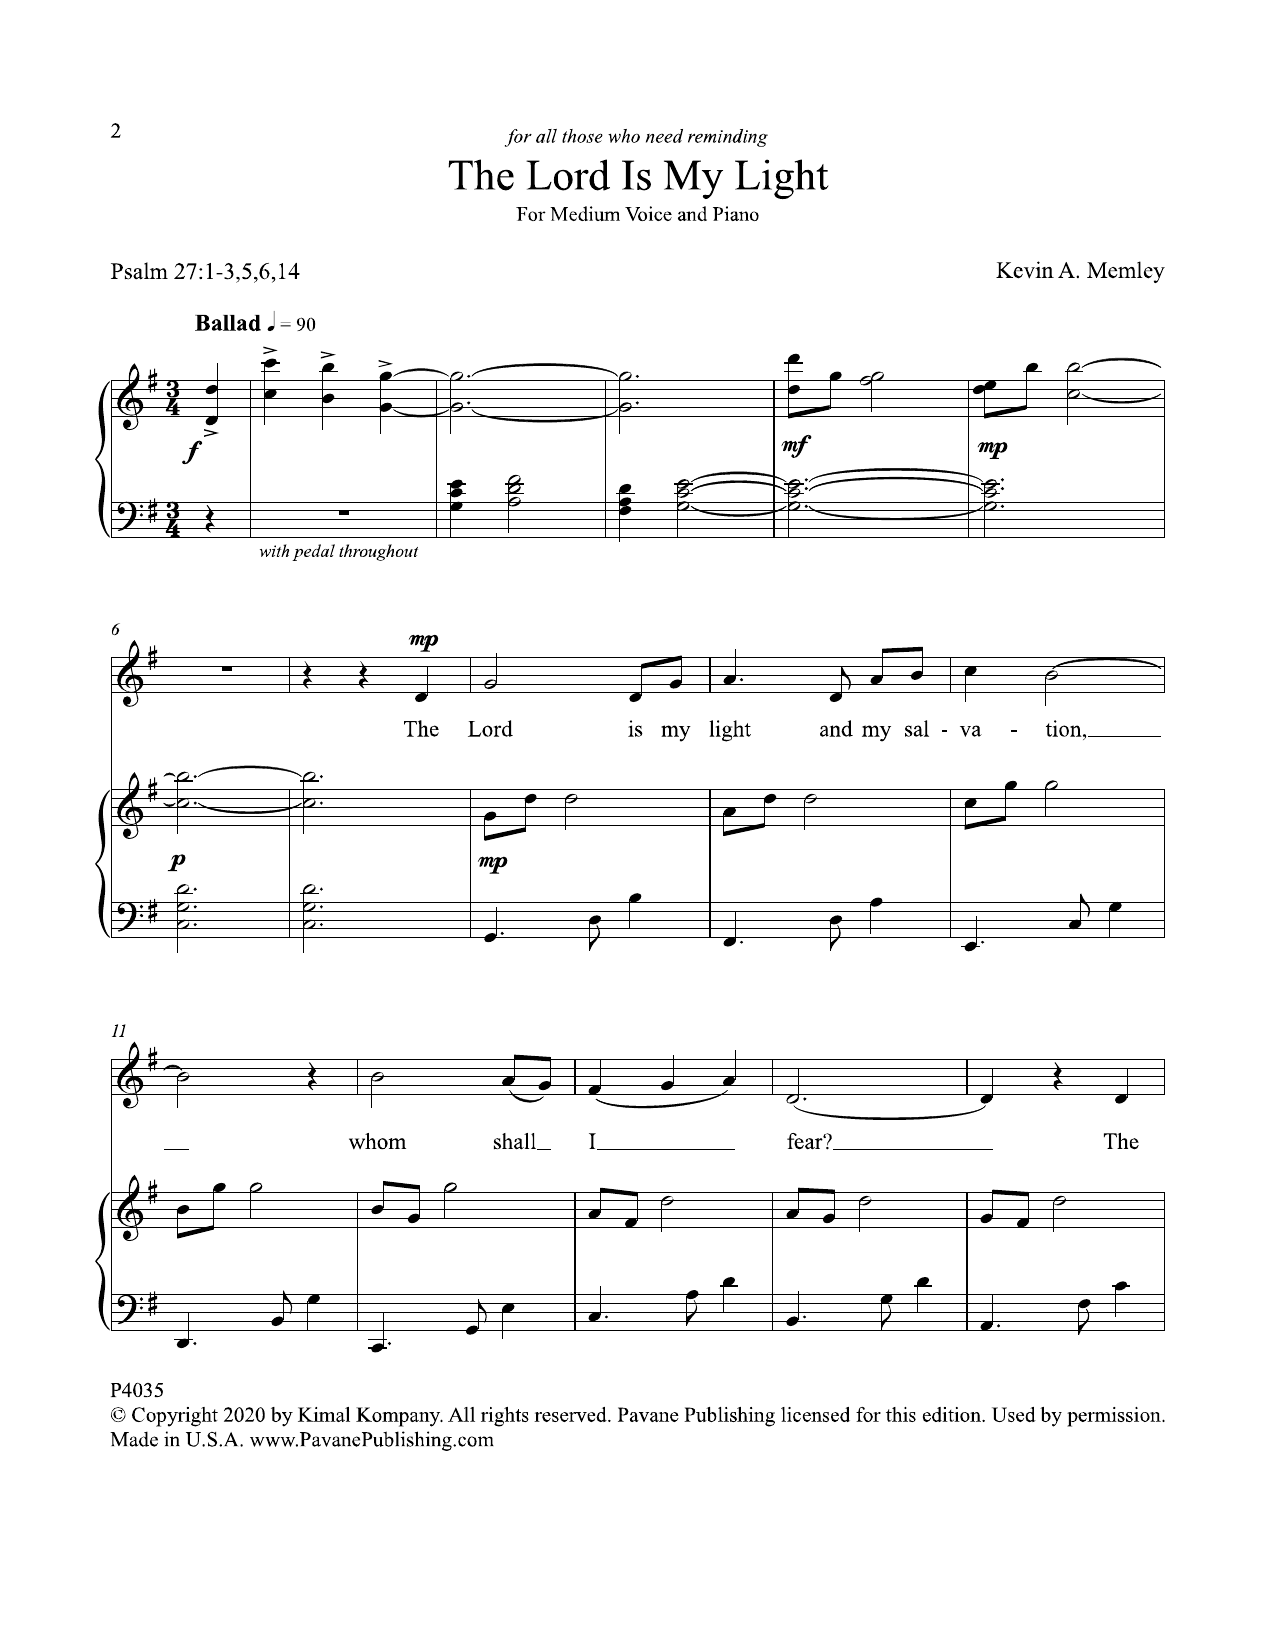 Download Kevin A. Memley The Lord Is My Light Sheet Music